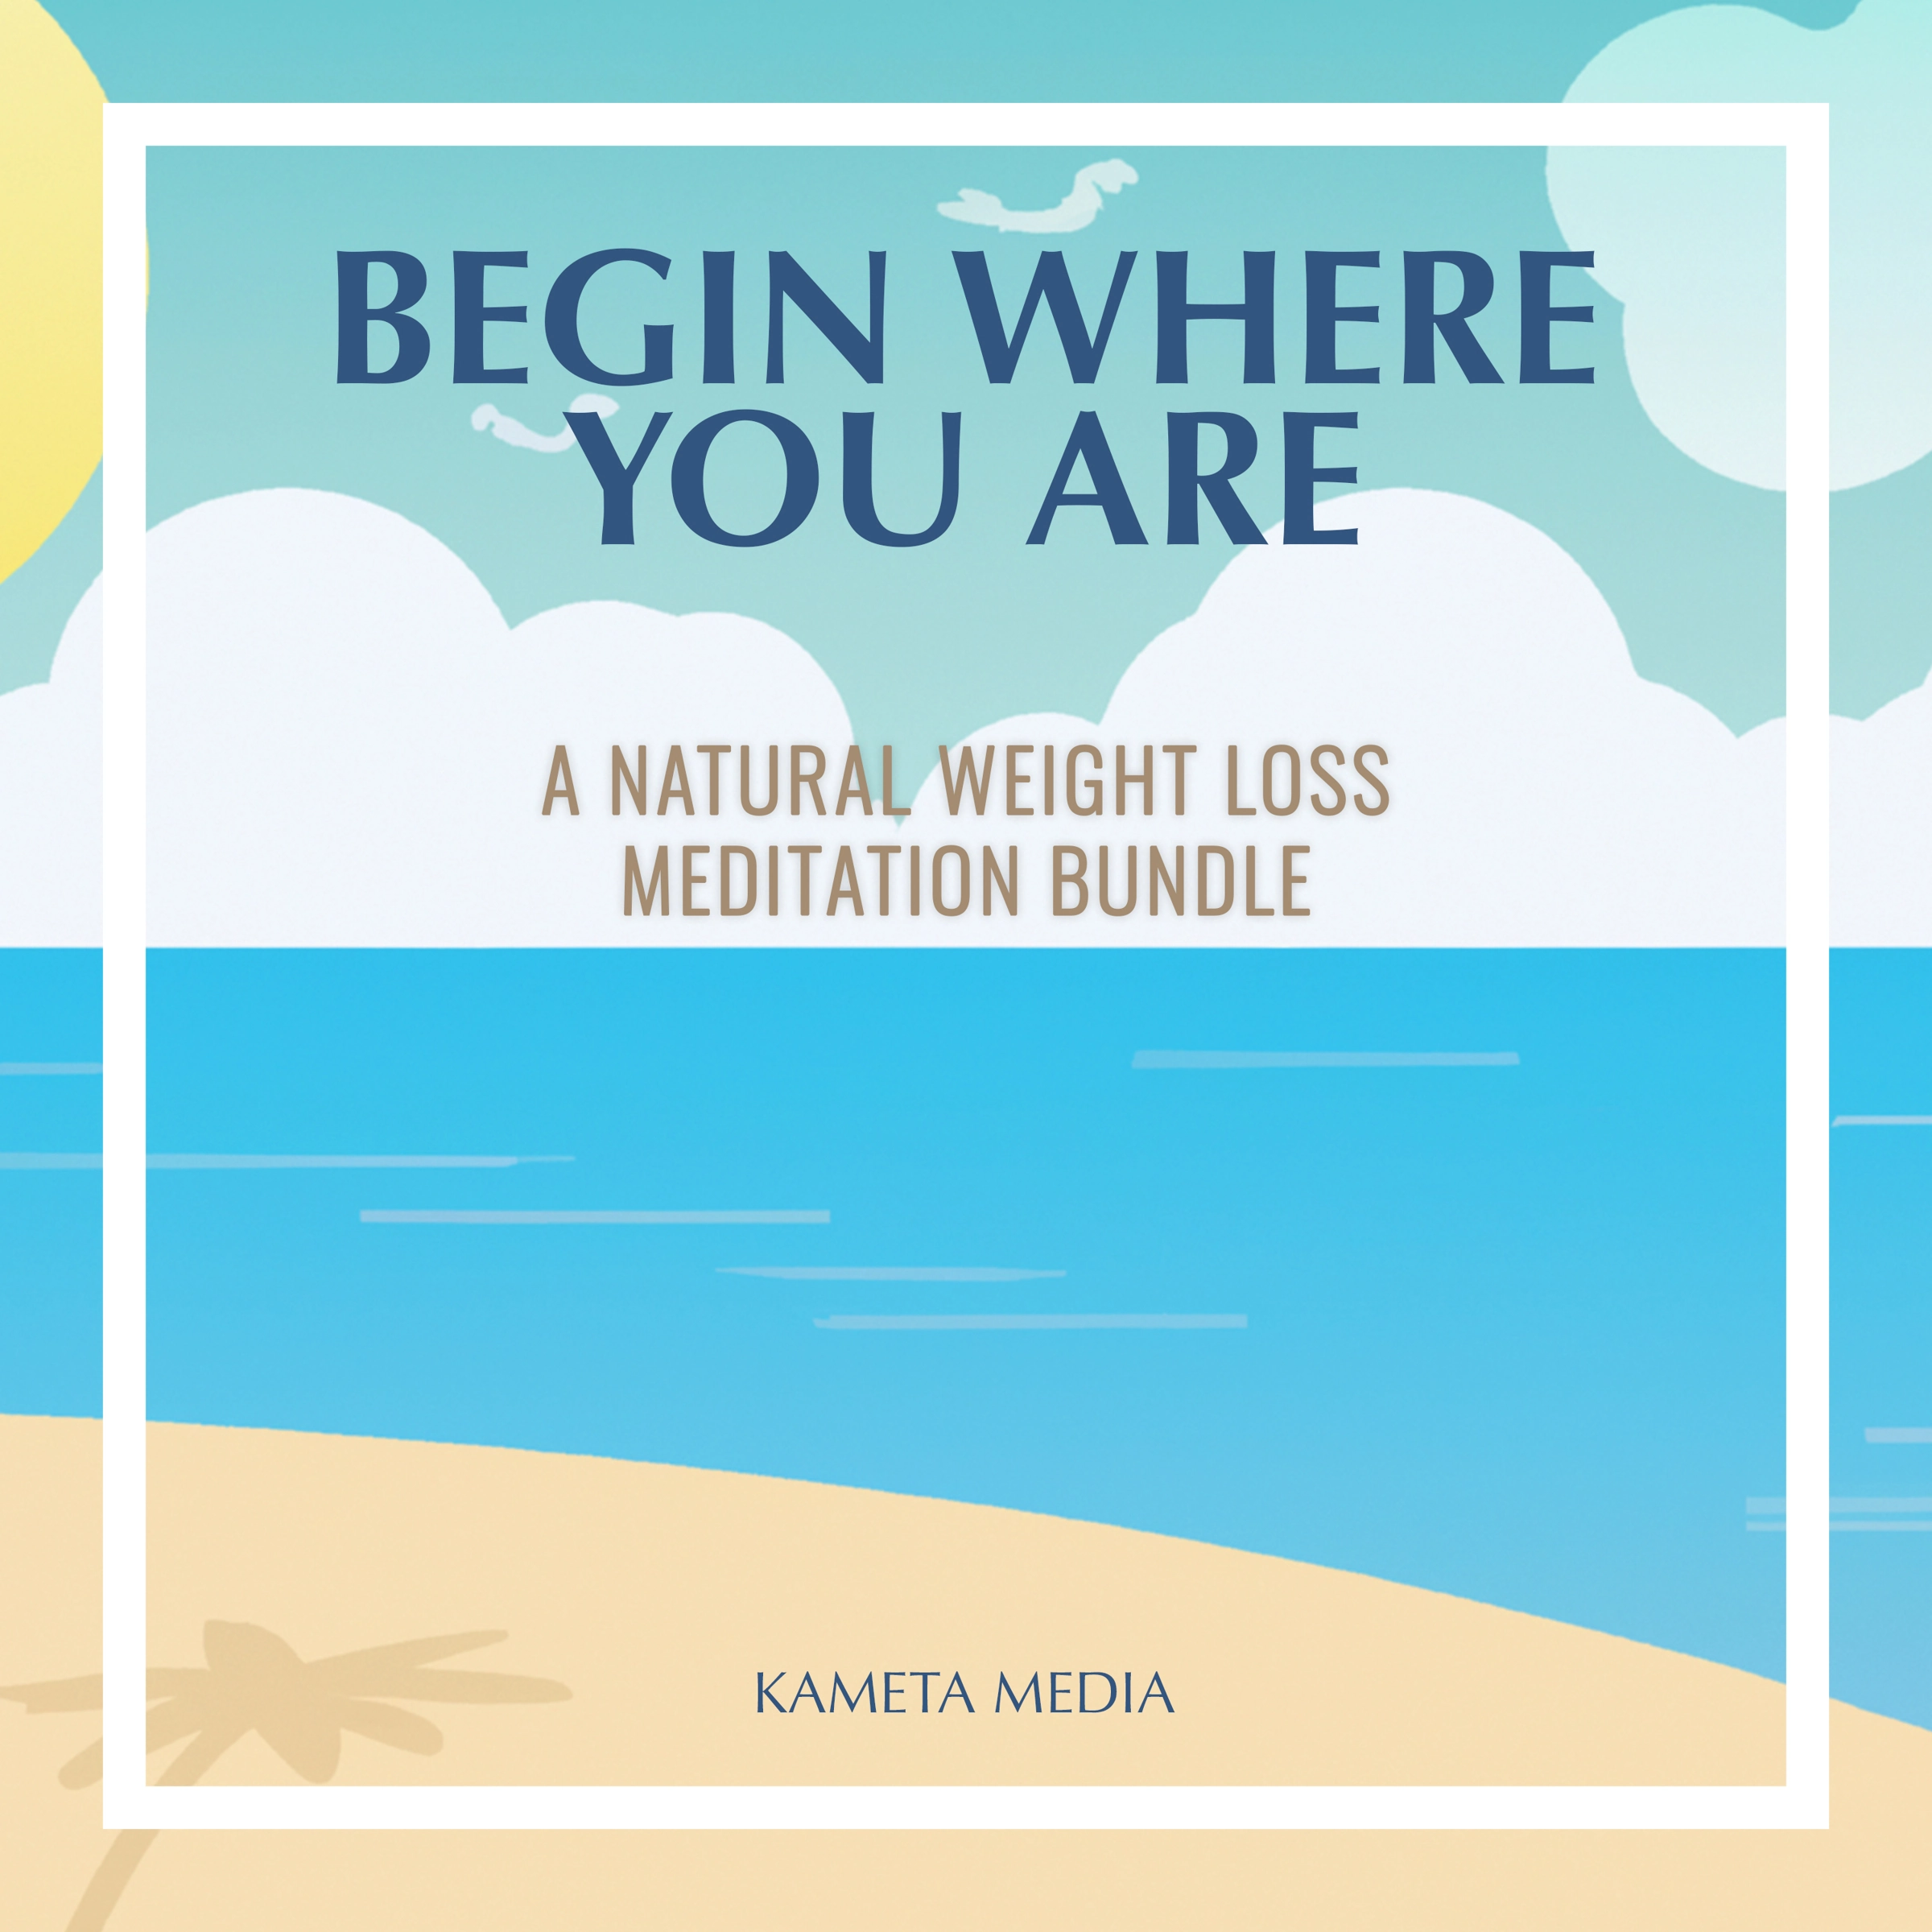 Begin Where You Are: A Natural Weight Loss Meditation Bundle Audiobook by Kameta Media